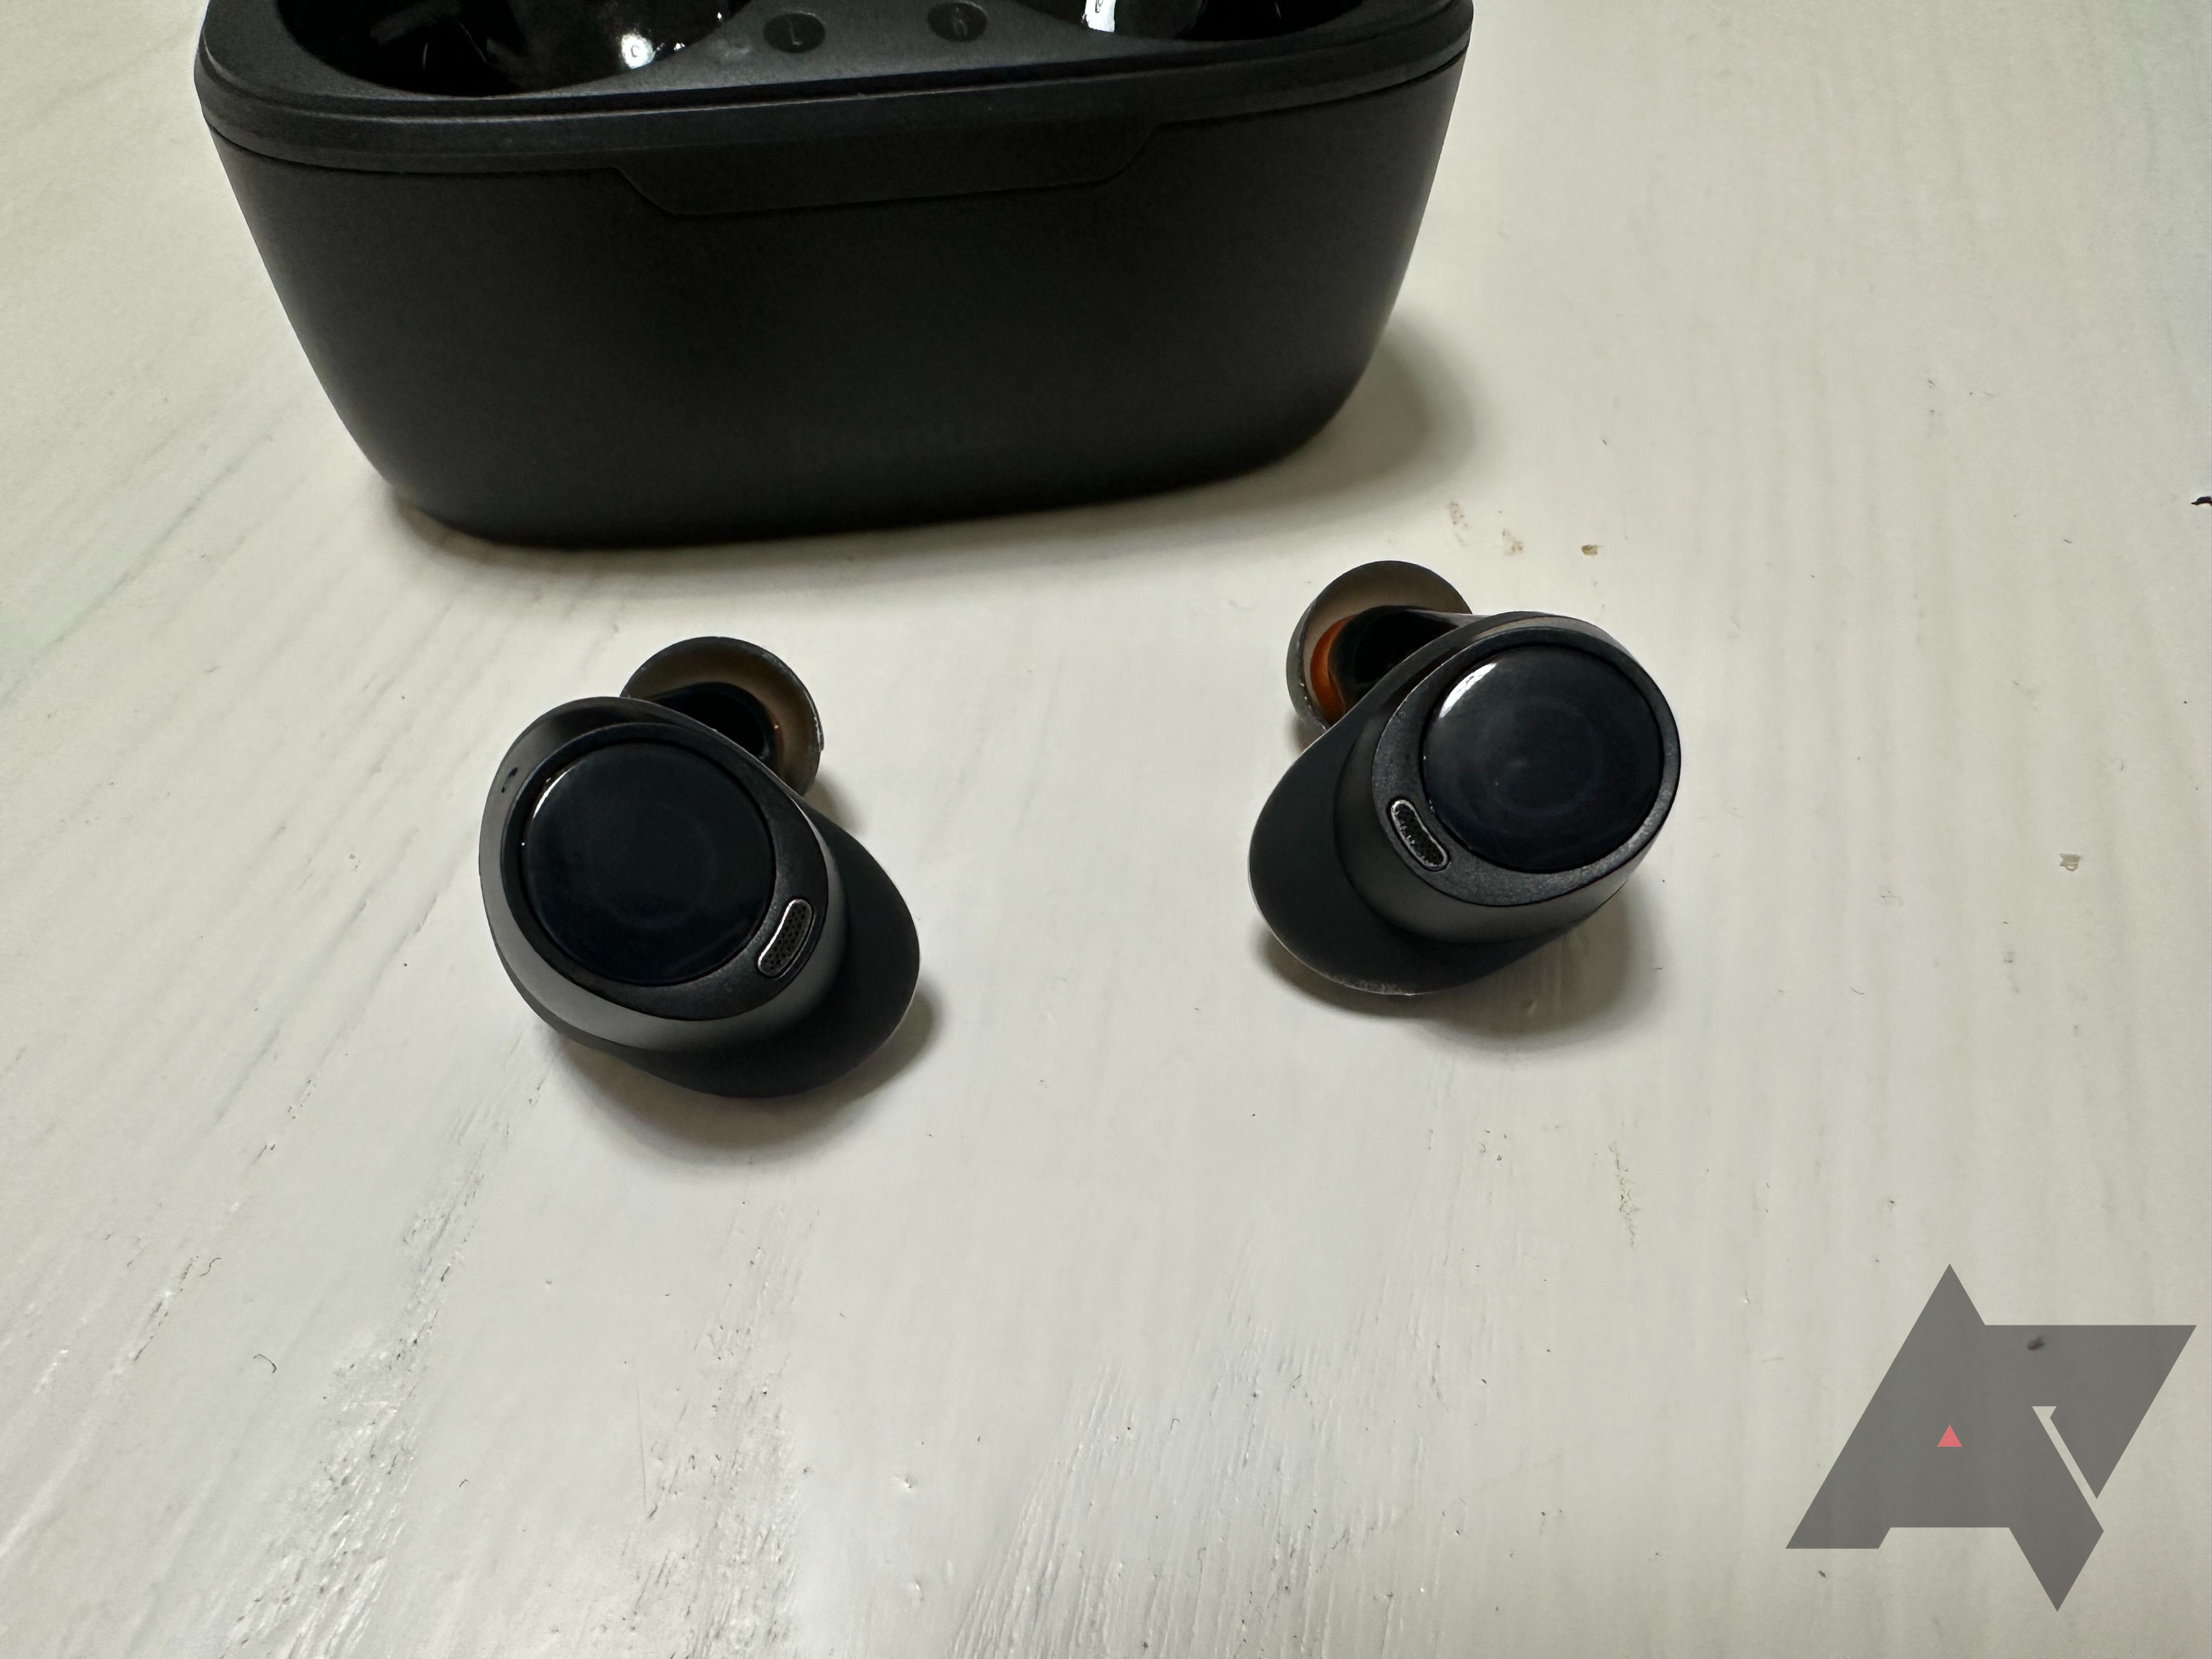 Baseus Bowie MA10 review: Sub-$30 stunner earbuds